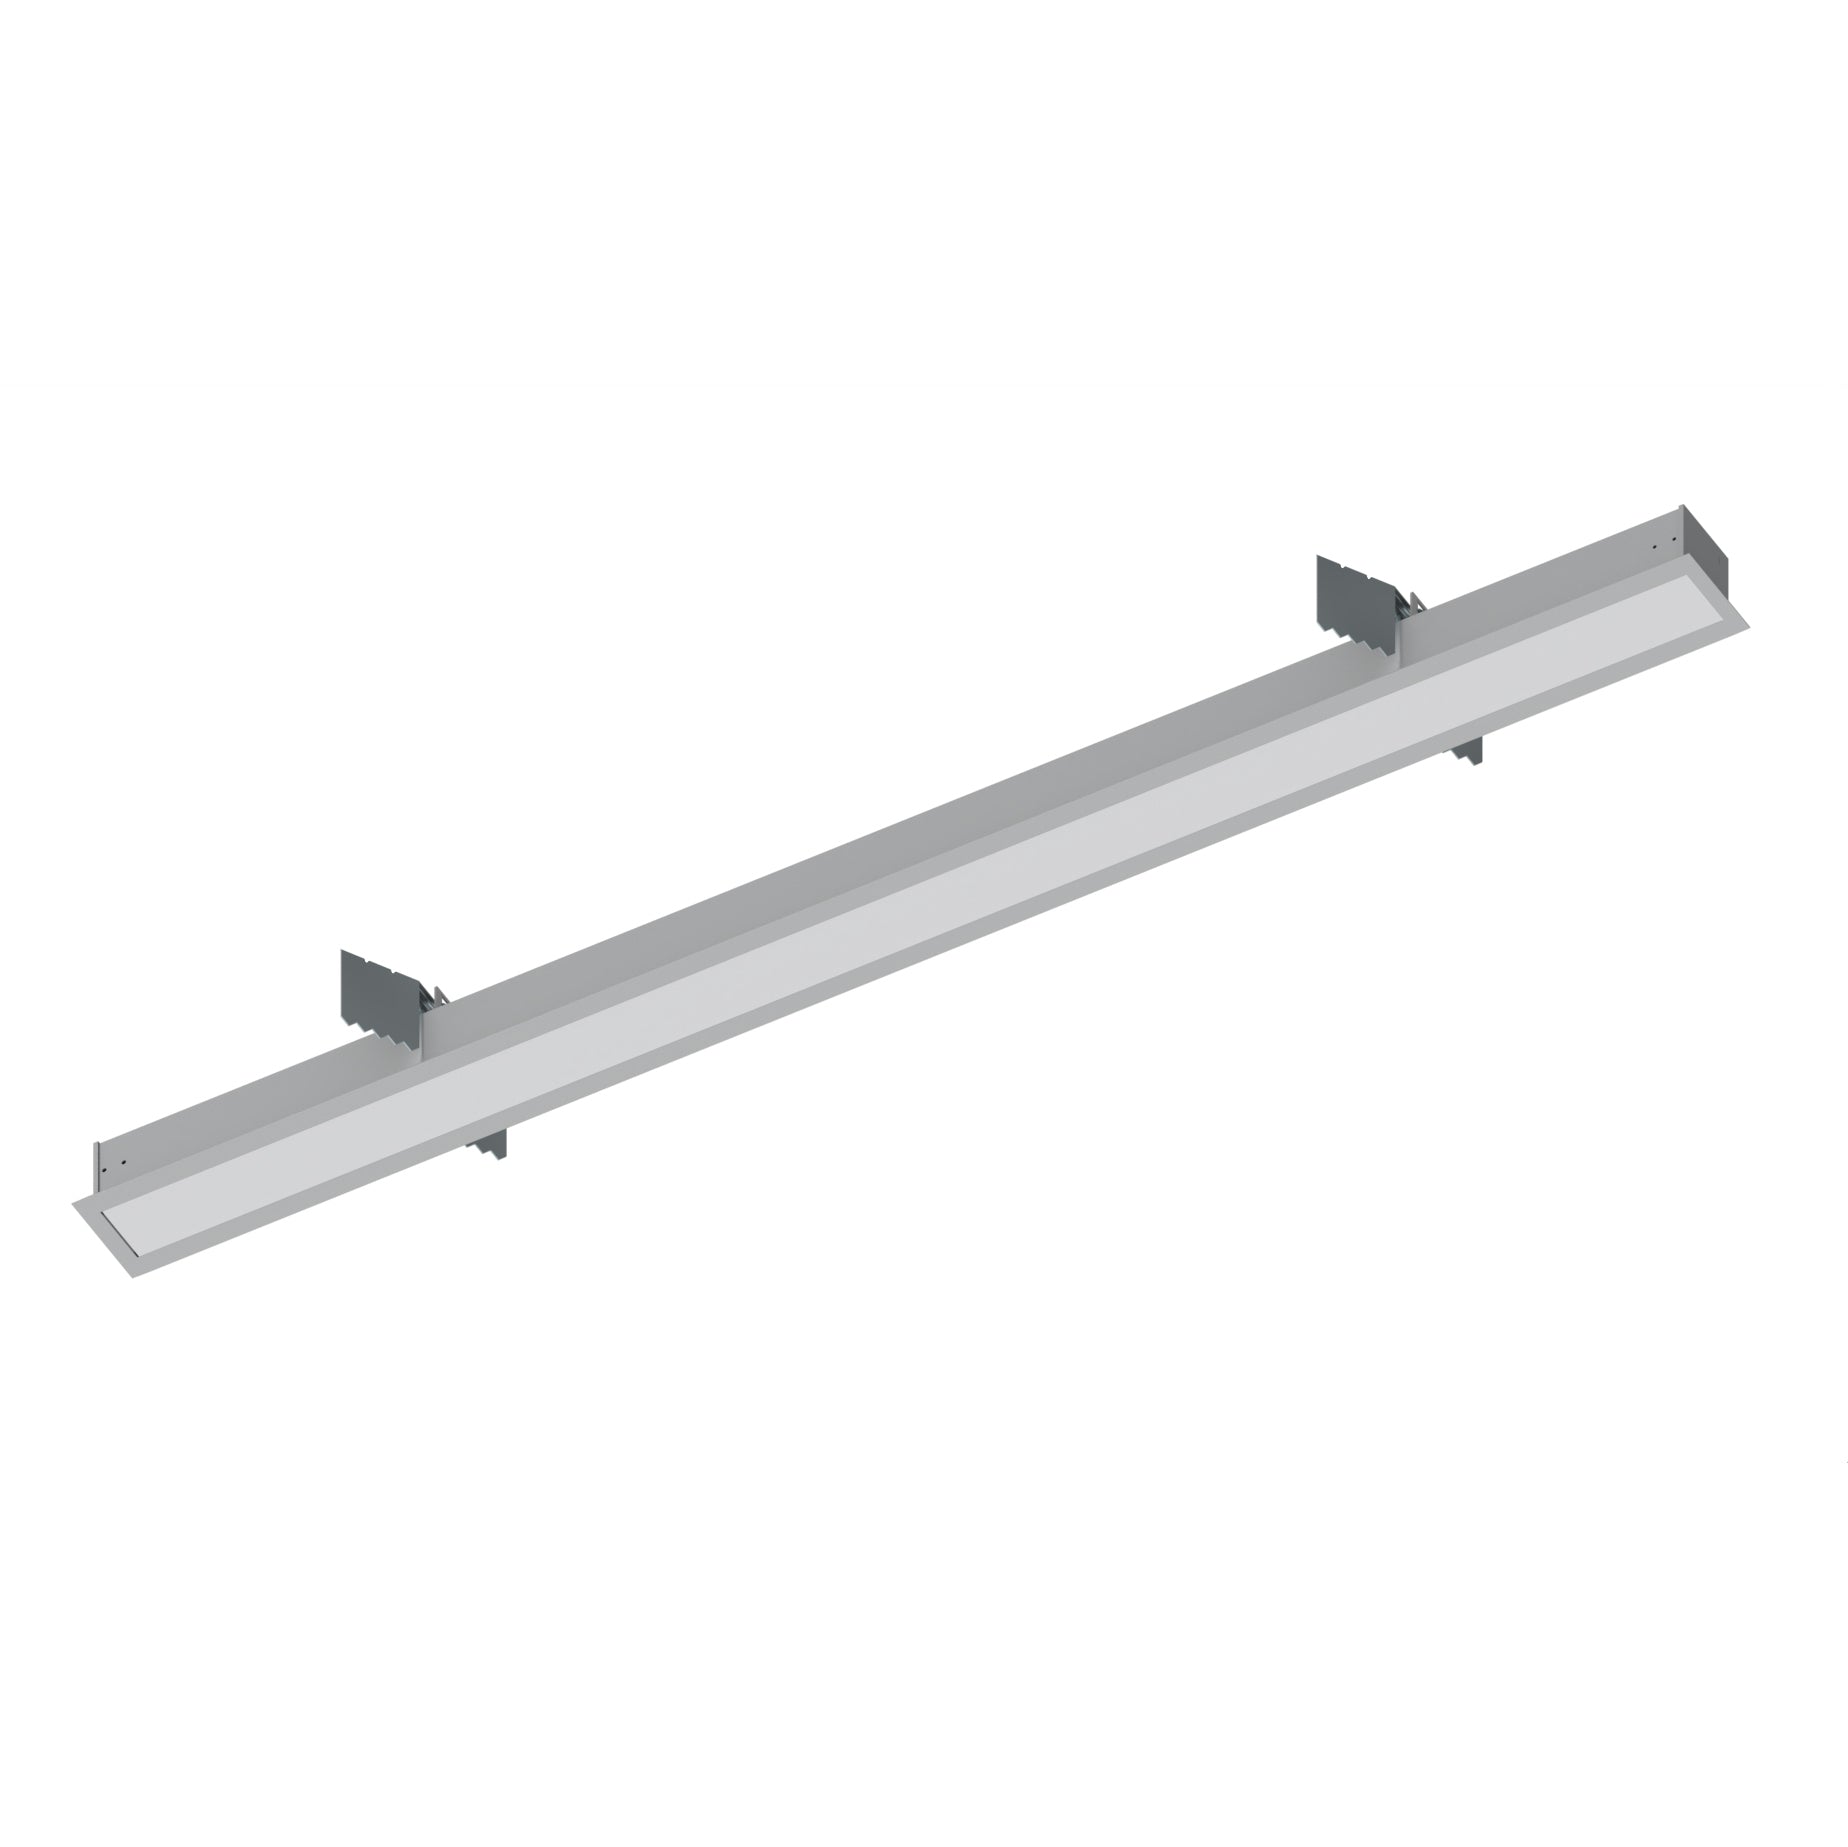 Nora Lighting NRLIN-41035A - Linear - 4' L-Line LED Recessed Linear, 4200lm / 3500K, Aluminum Finish